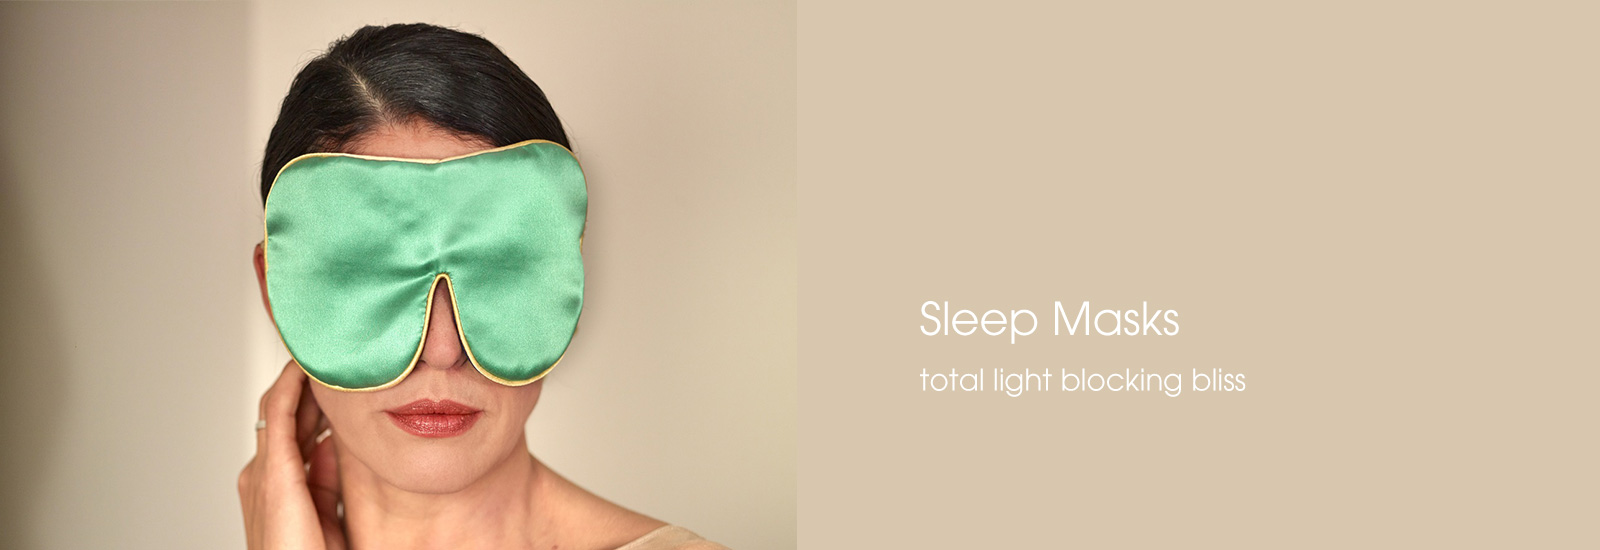 Discover our beautiful, luxurious Lavender eye masks.  Proven to help you sleep.  Welcome to the beauty worlds best kept secret.